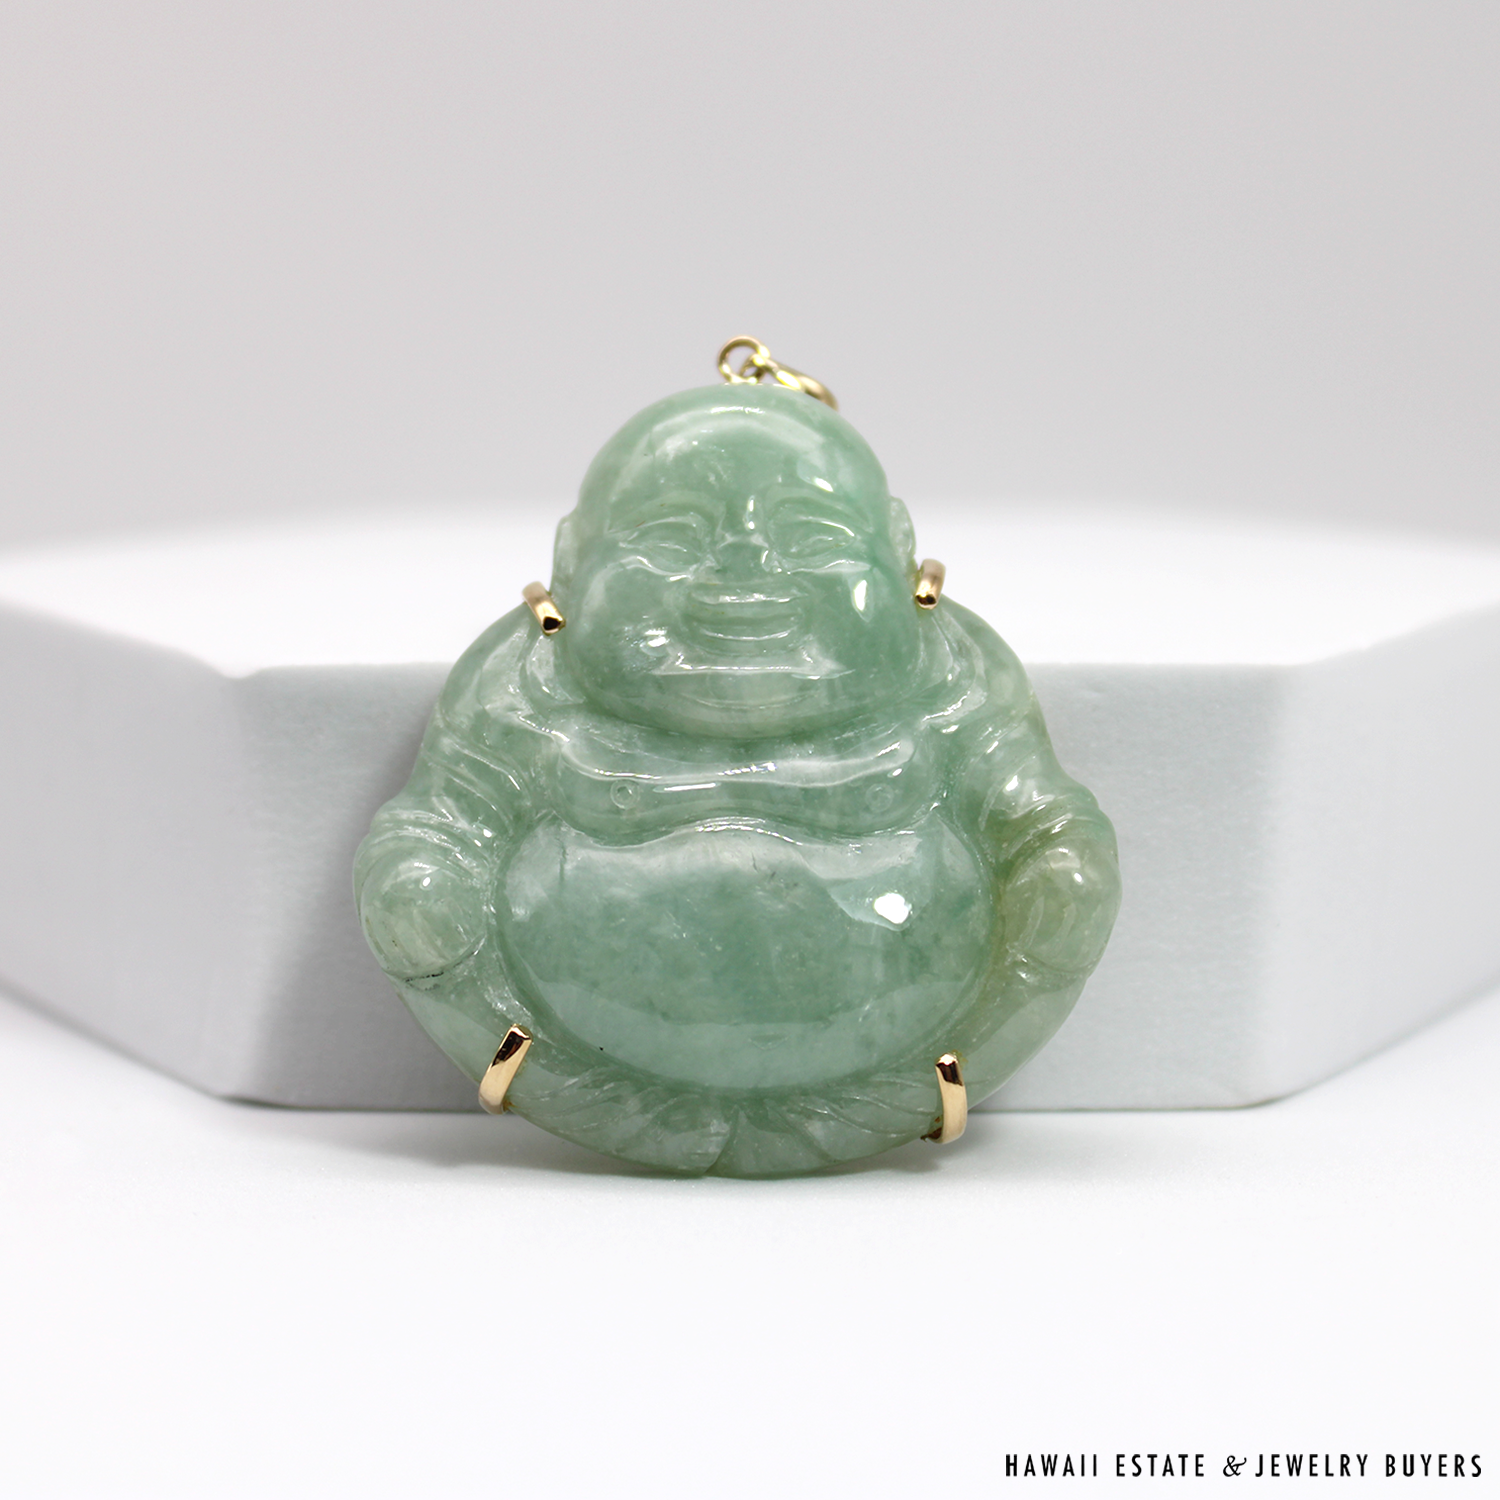 18k Gold Plated Laughing Buddha Pendant Necklace Green Jade – Rock Steady